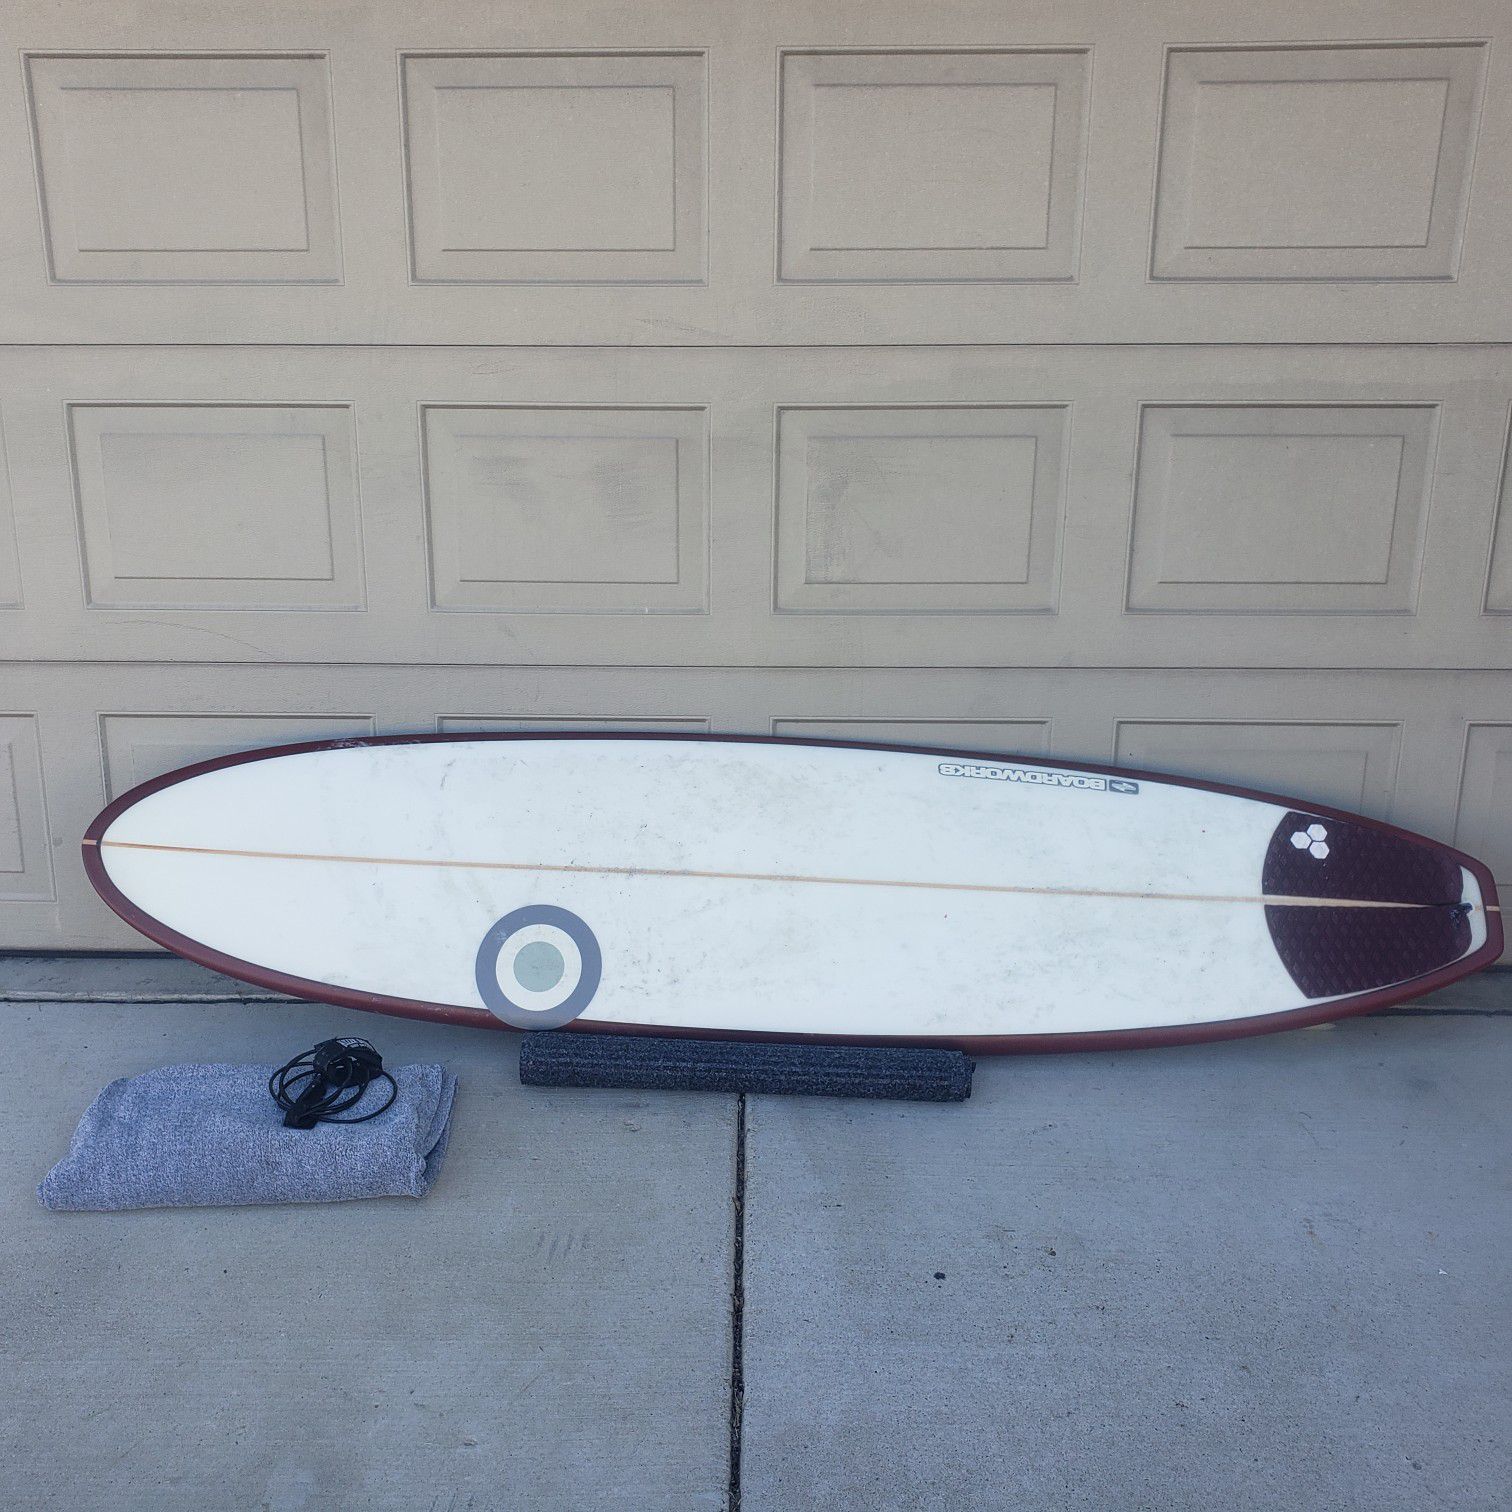 Boardworks 7' 6" Surf board with extras